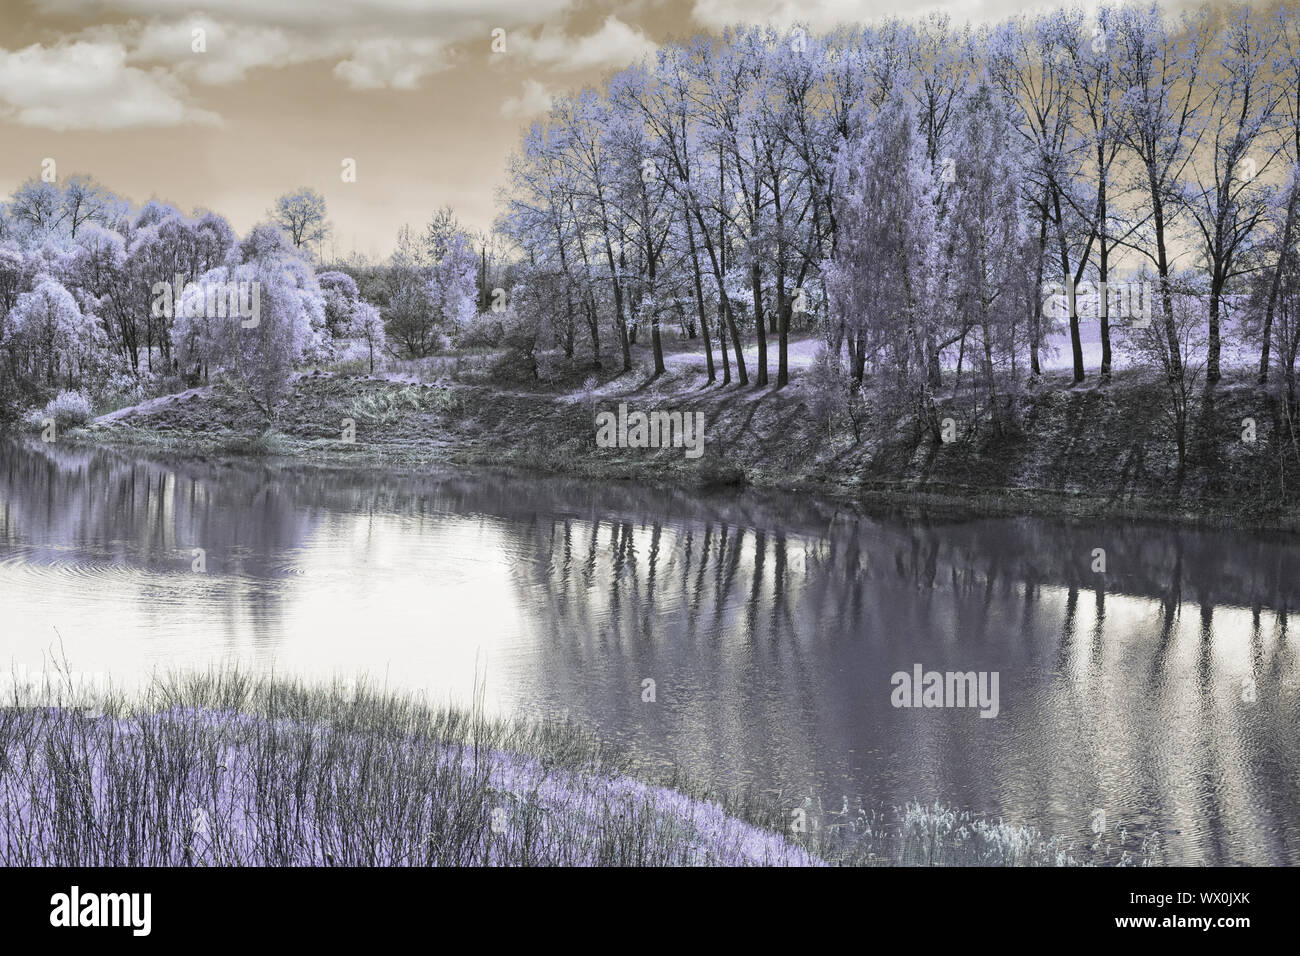 Large beautiful lake, with banks overgrown with forest. Stock Photo